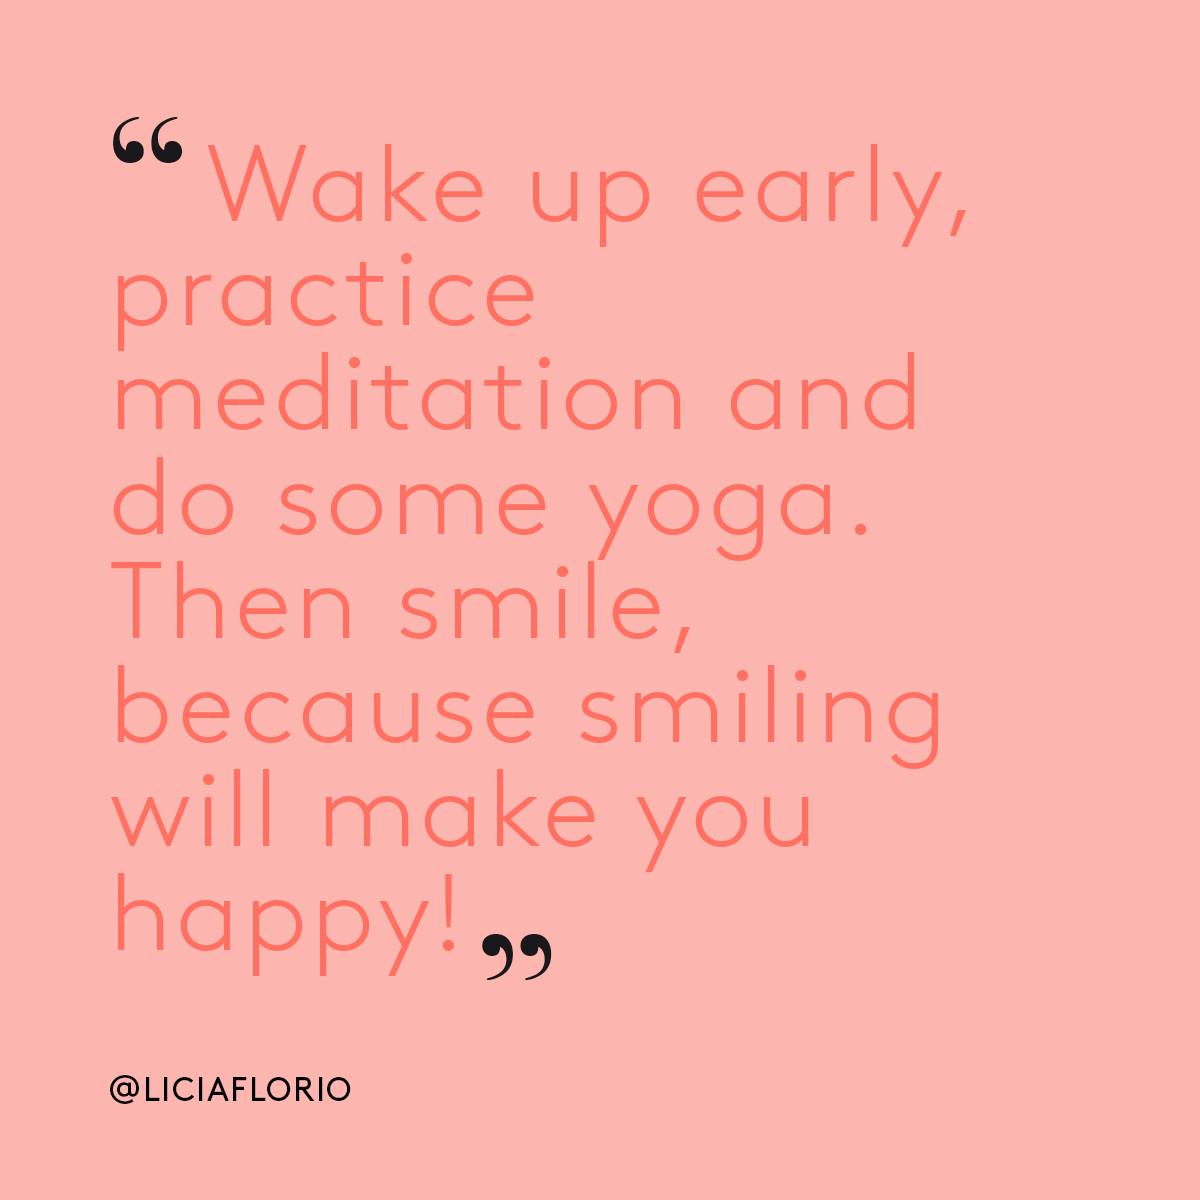 LICIA FLORIO's advice for #nelfrattempo Marella: "Wake up early, practice meditation and do some yoga. Then smile, because smiling will make you happy" #Marella...